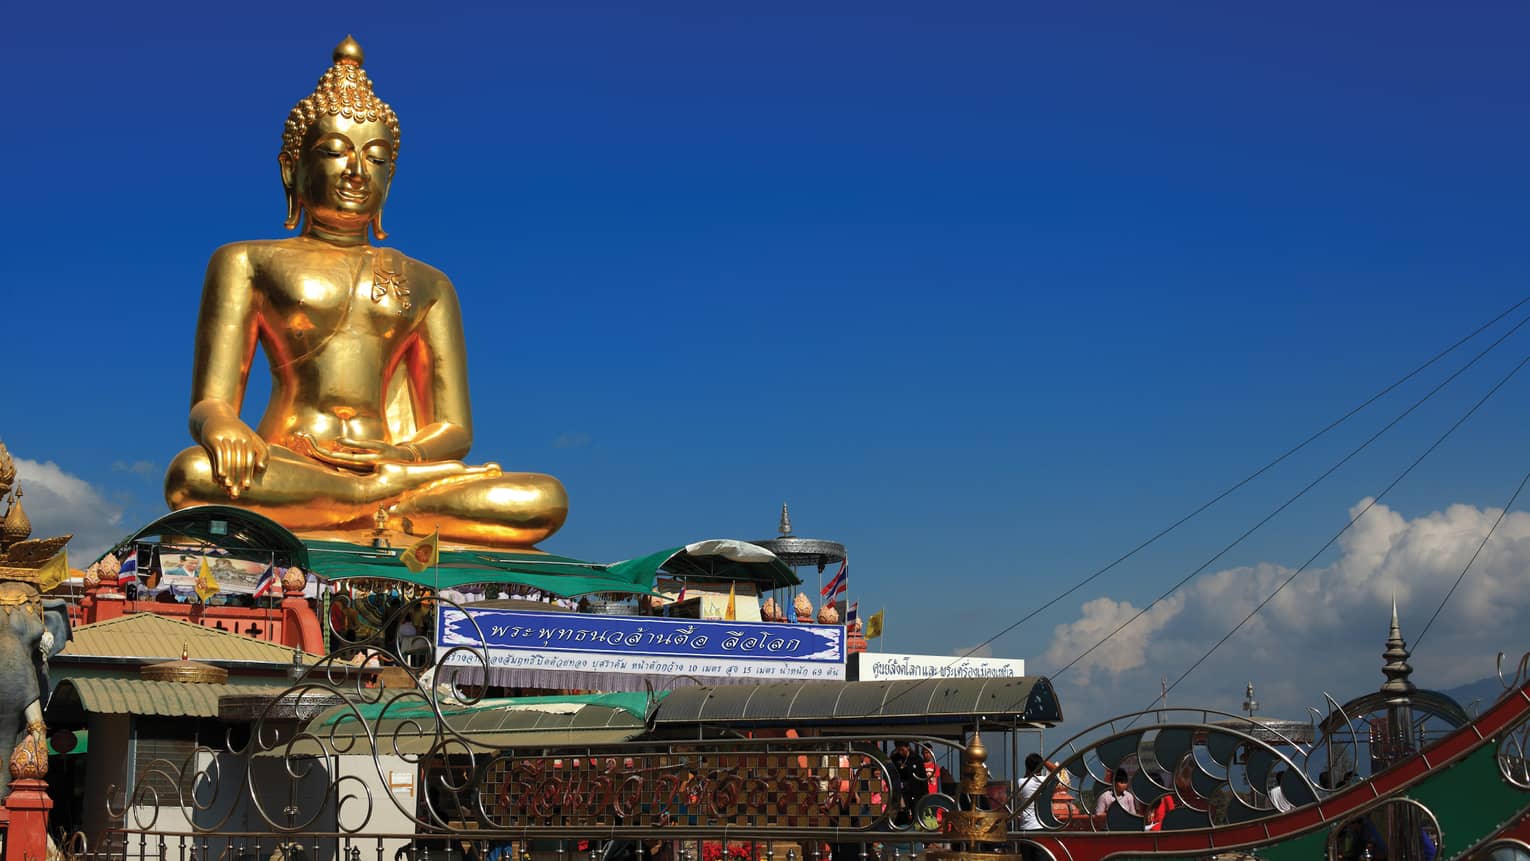 Gold Buddha statue on temple roof against a blue sky